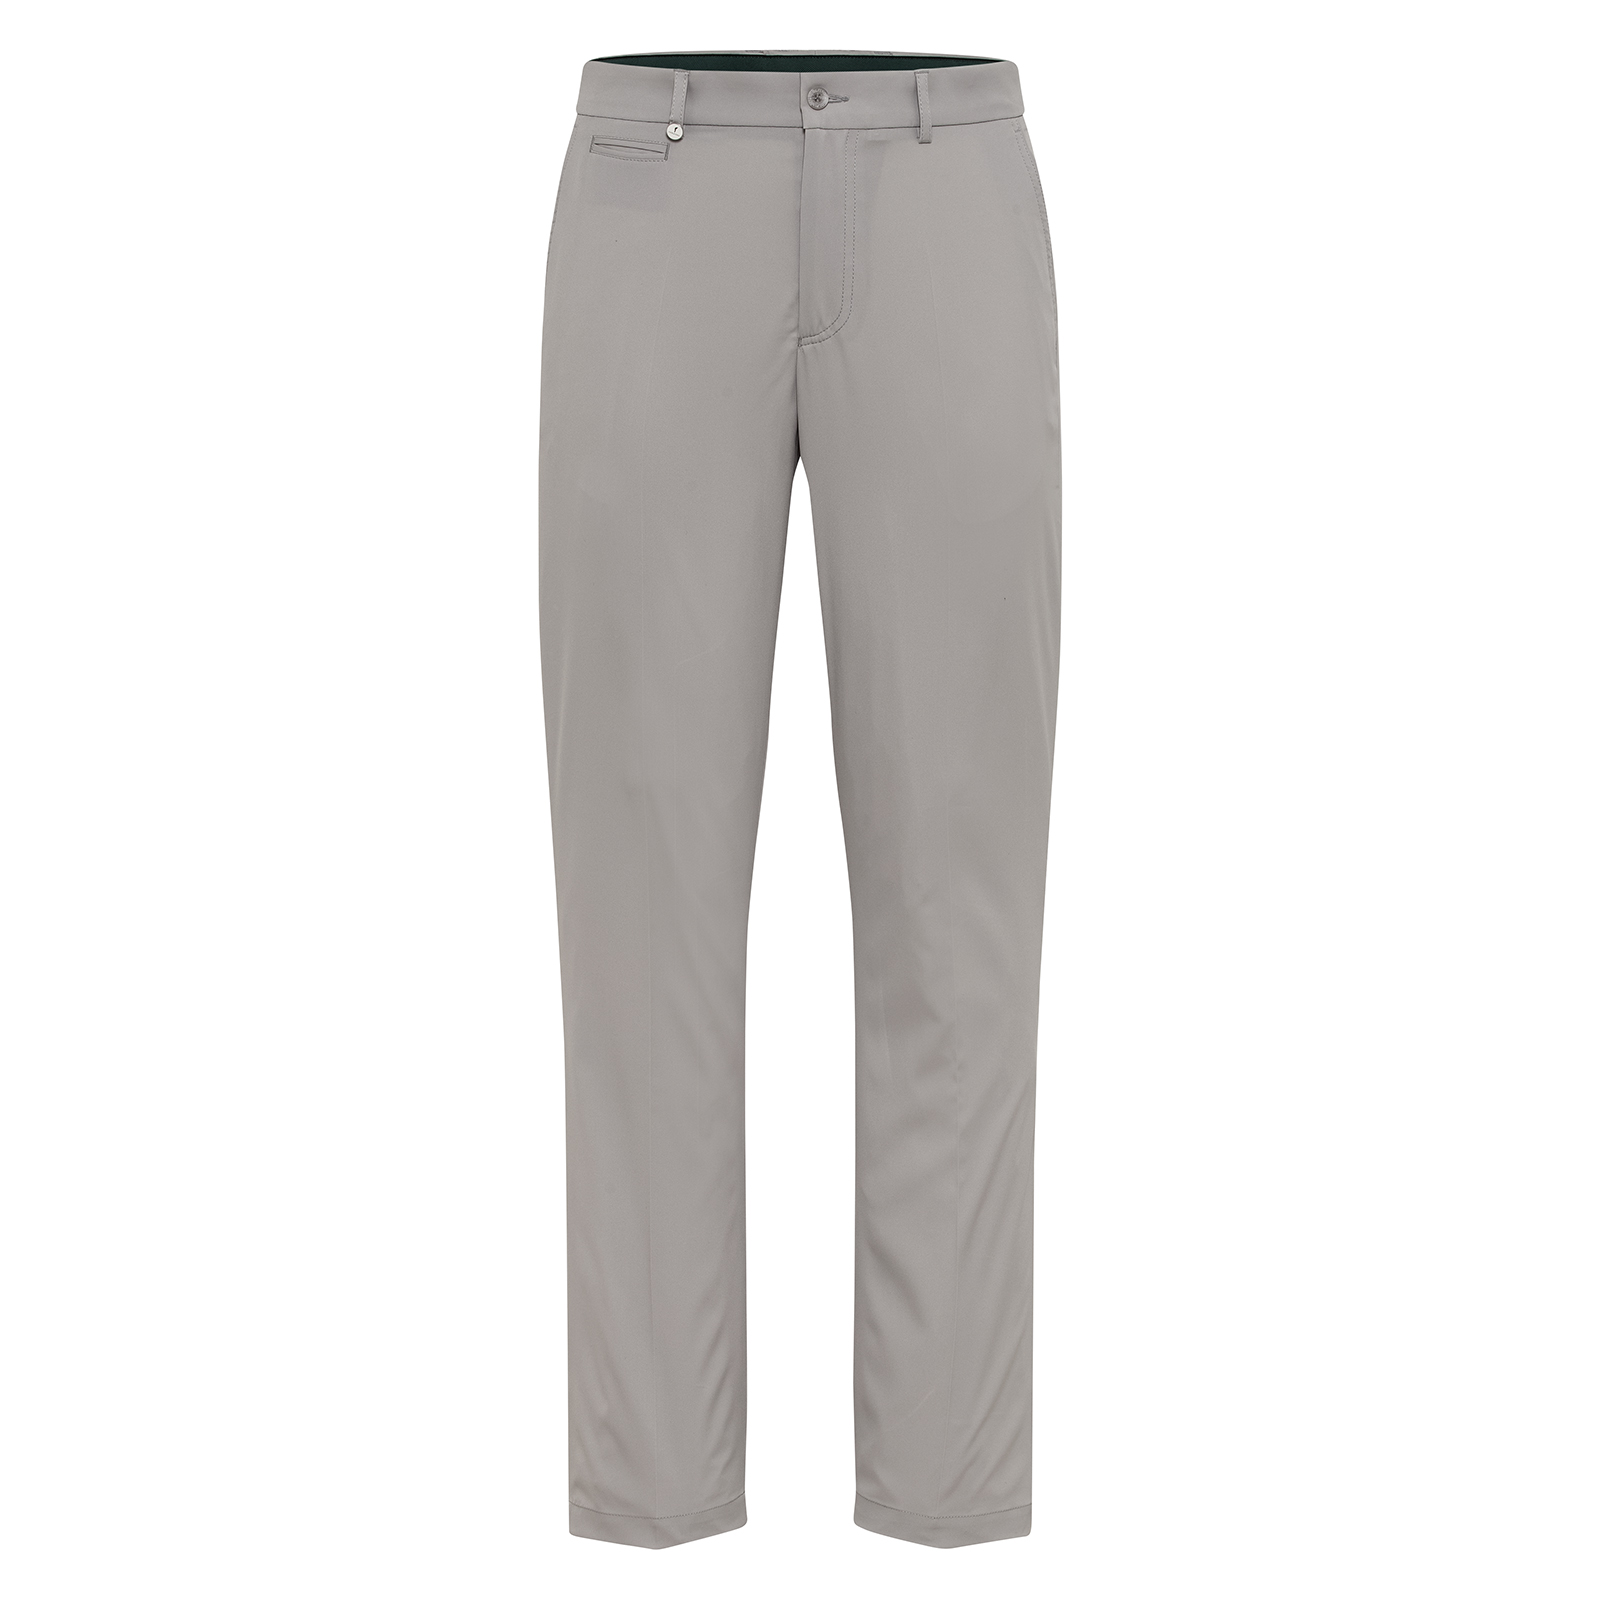 Men's quick dry golf trousers with good breathing properties